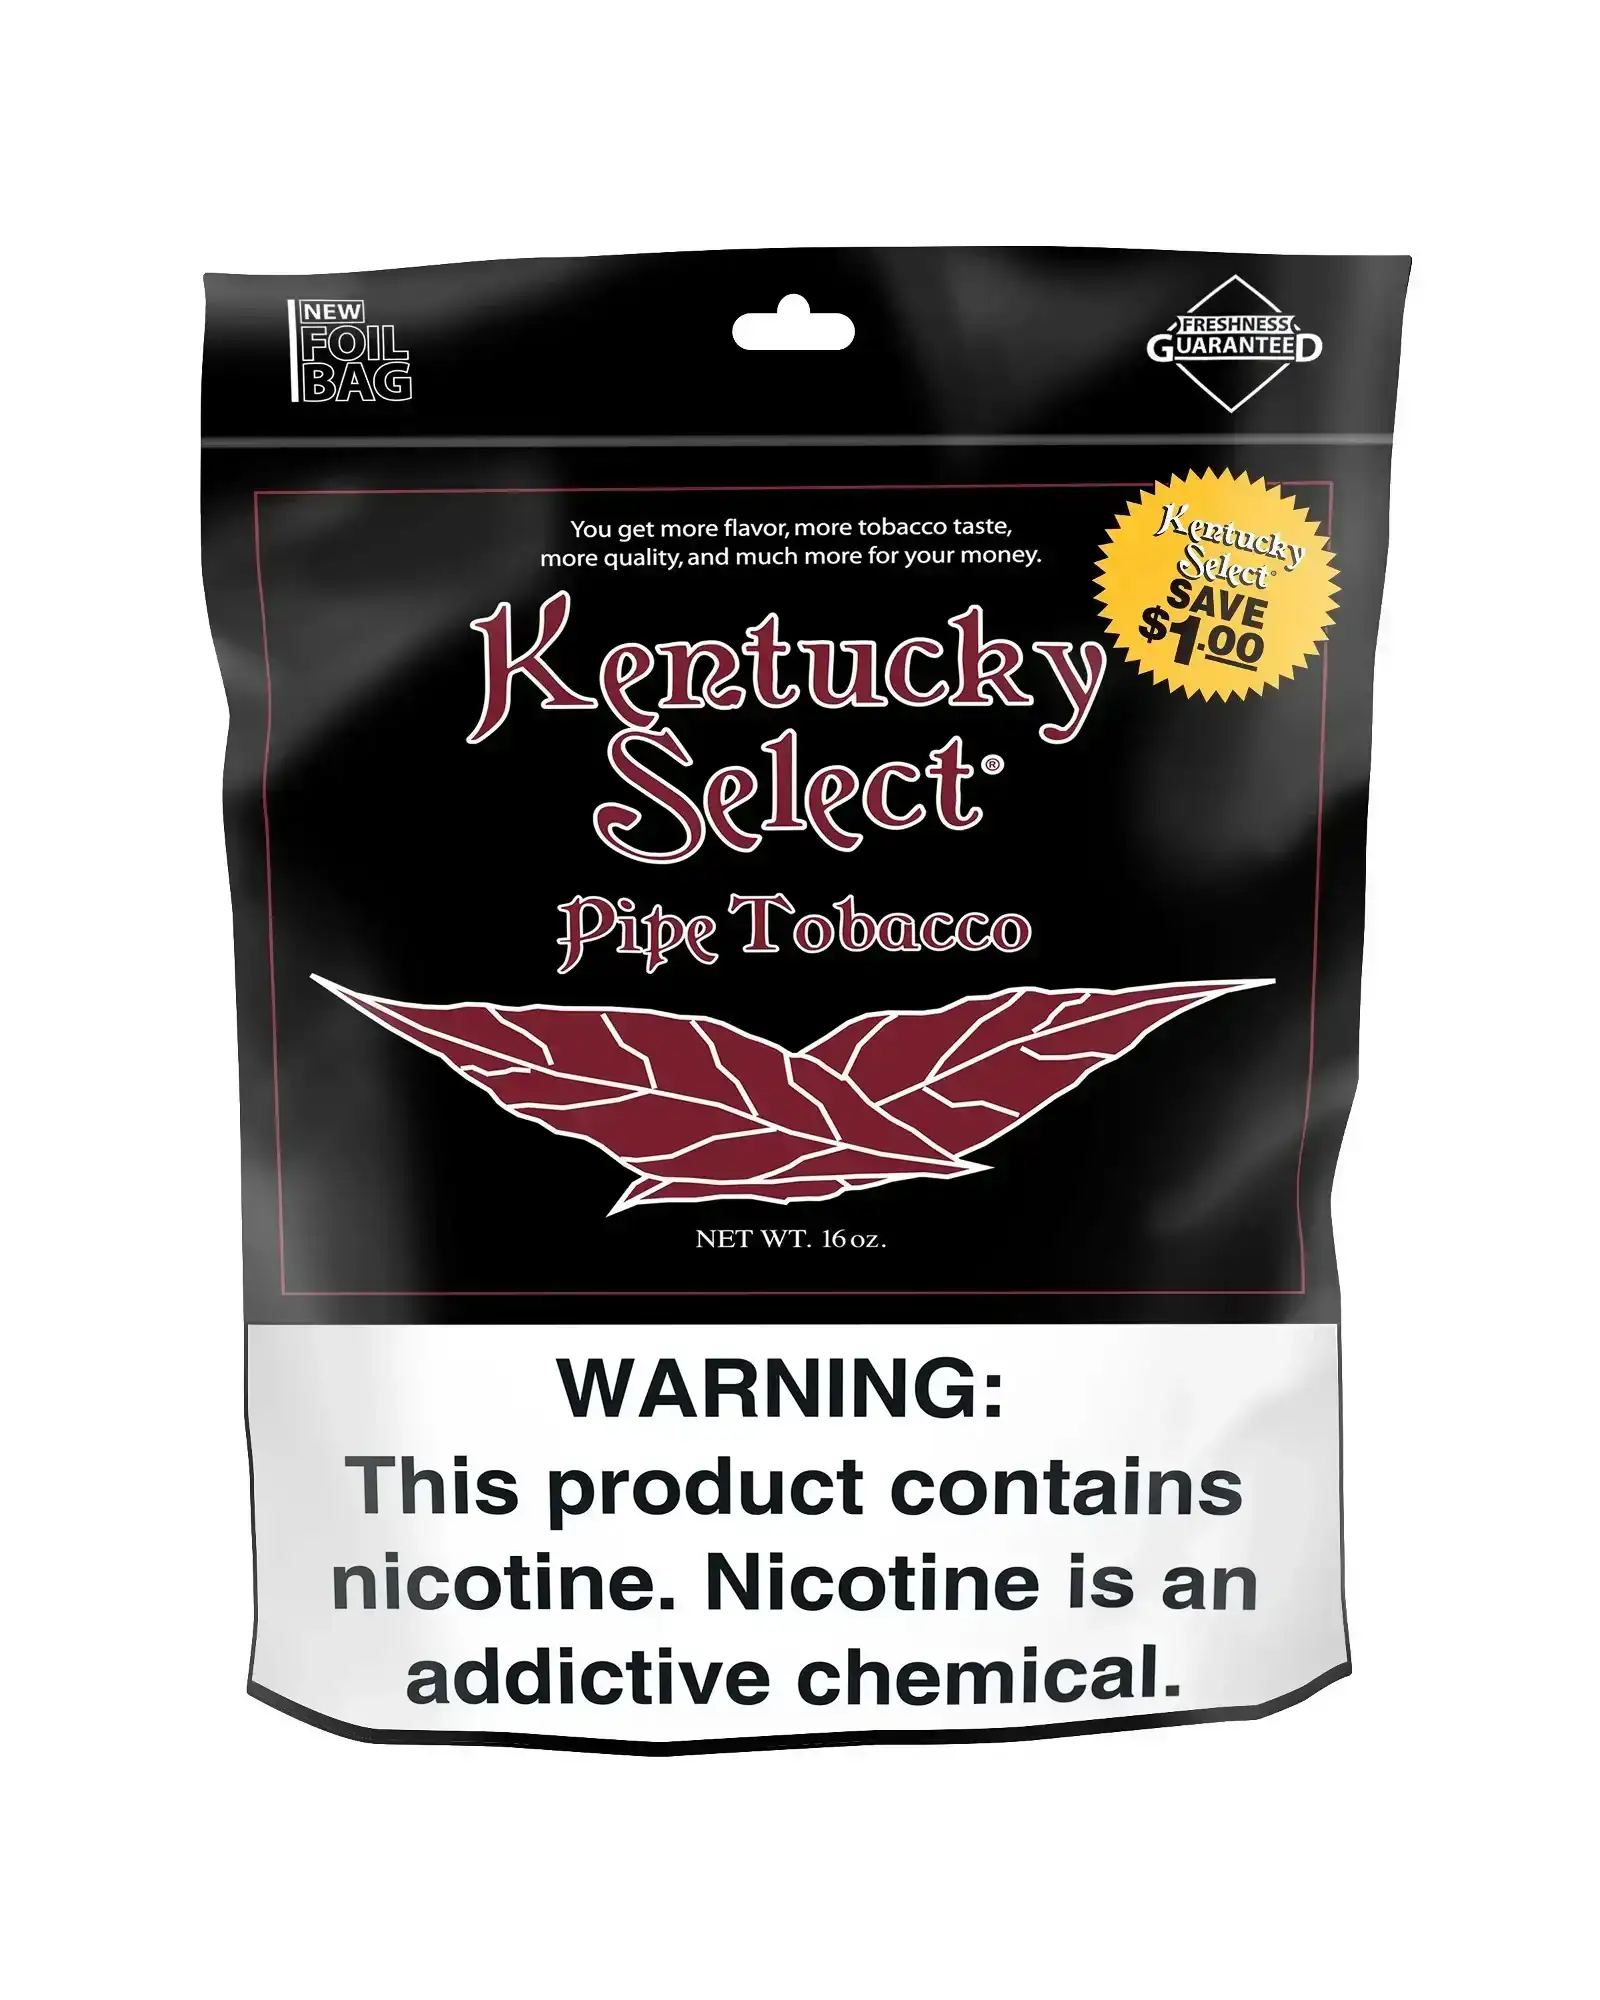 Kentucky Select Full Flavor Pipe Tobacco